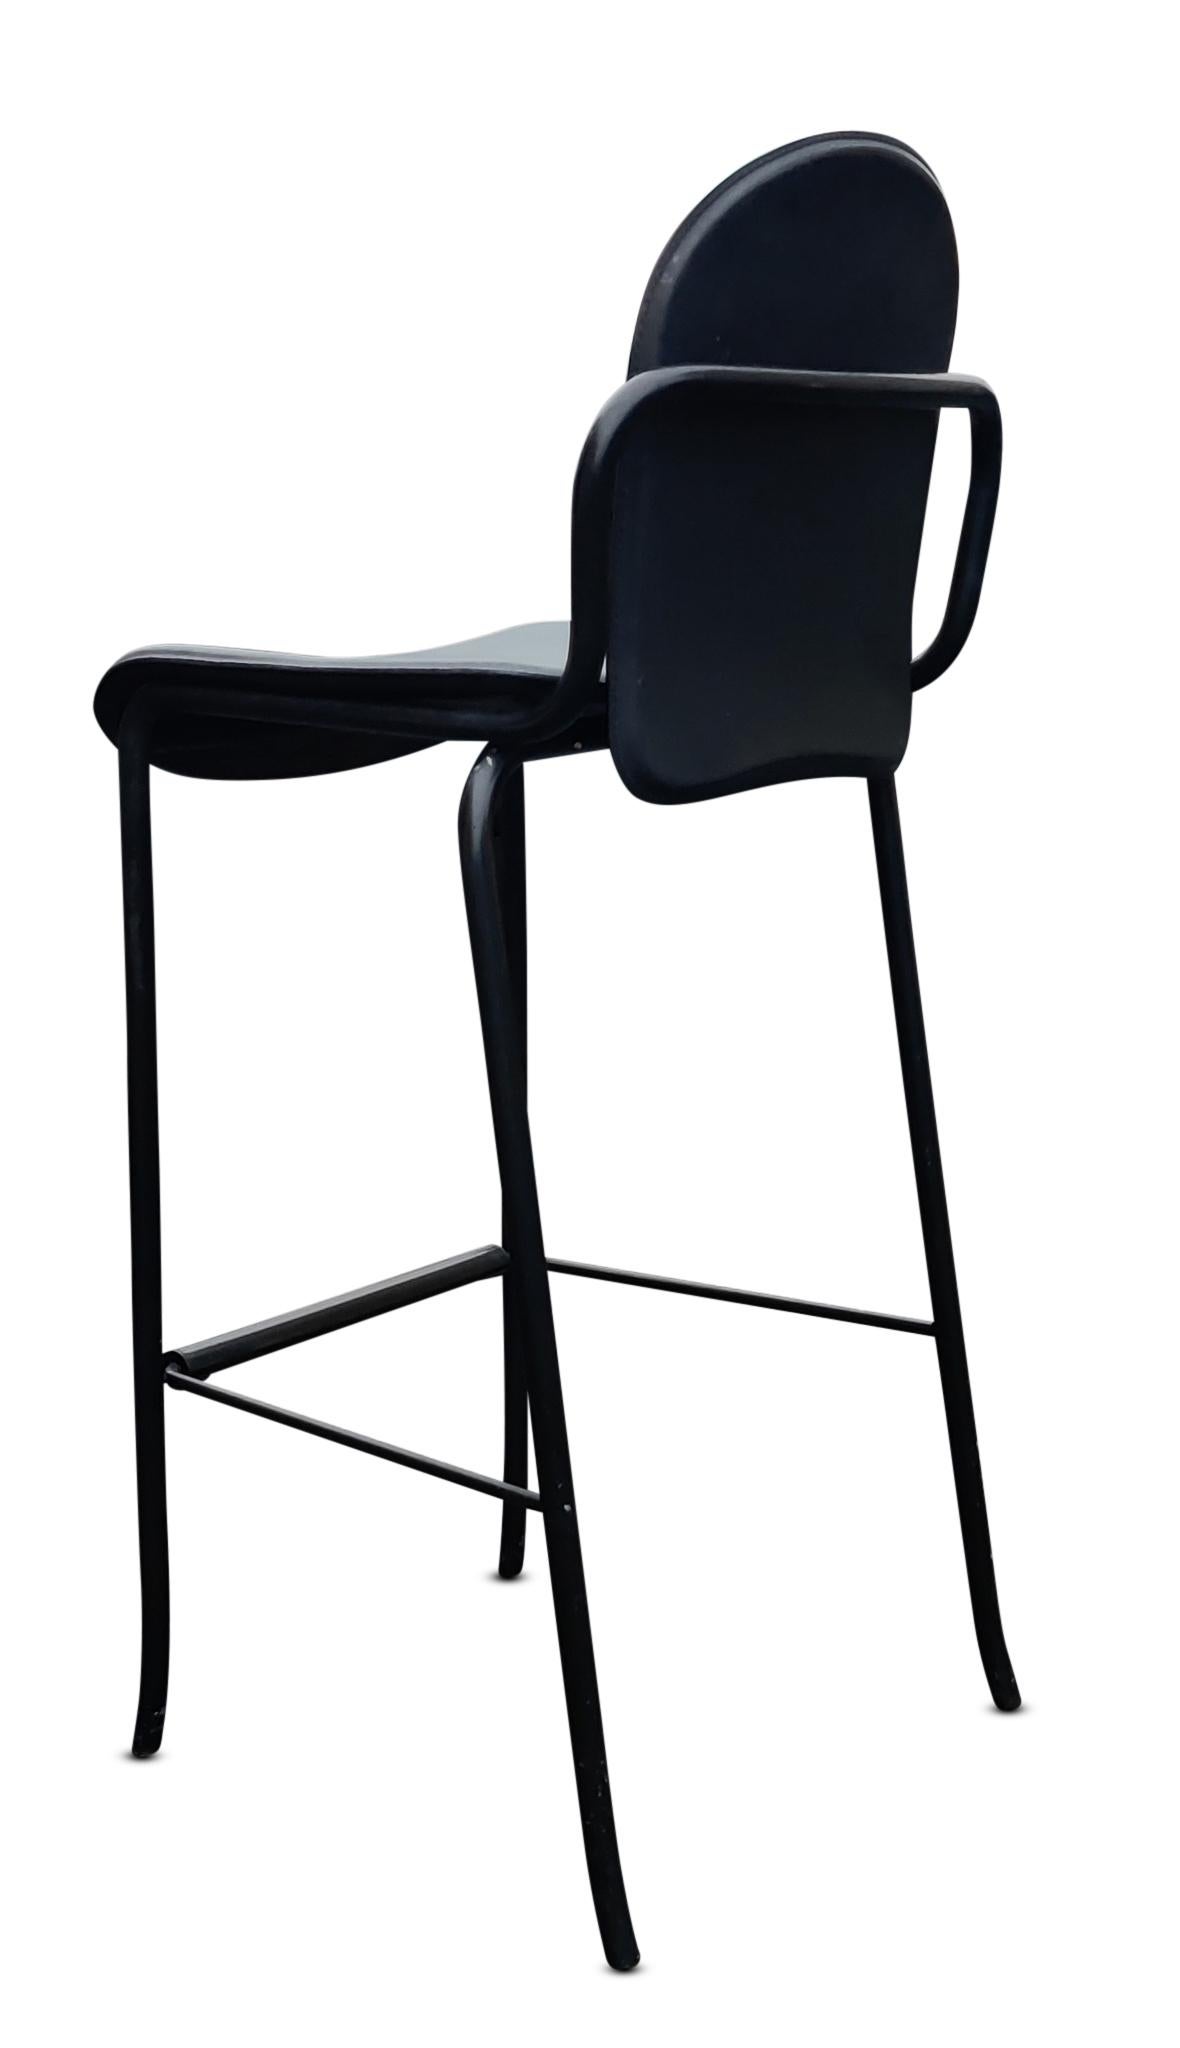 Four Willy Rizzo Style Black Leather Tubular Cidue Barstools Mid-Century Modern For Sale 1